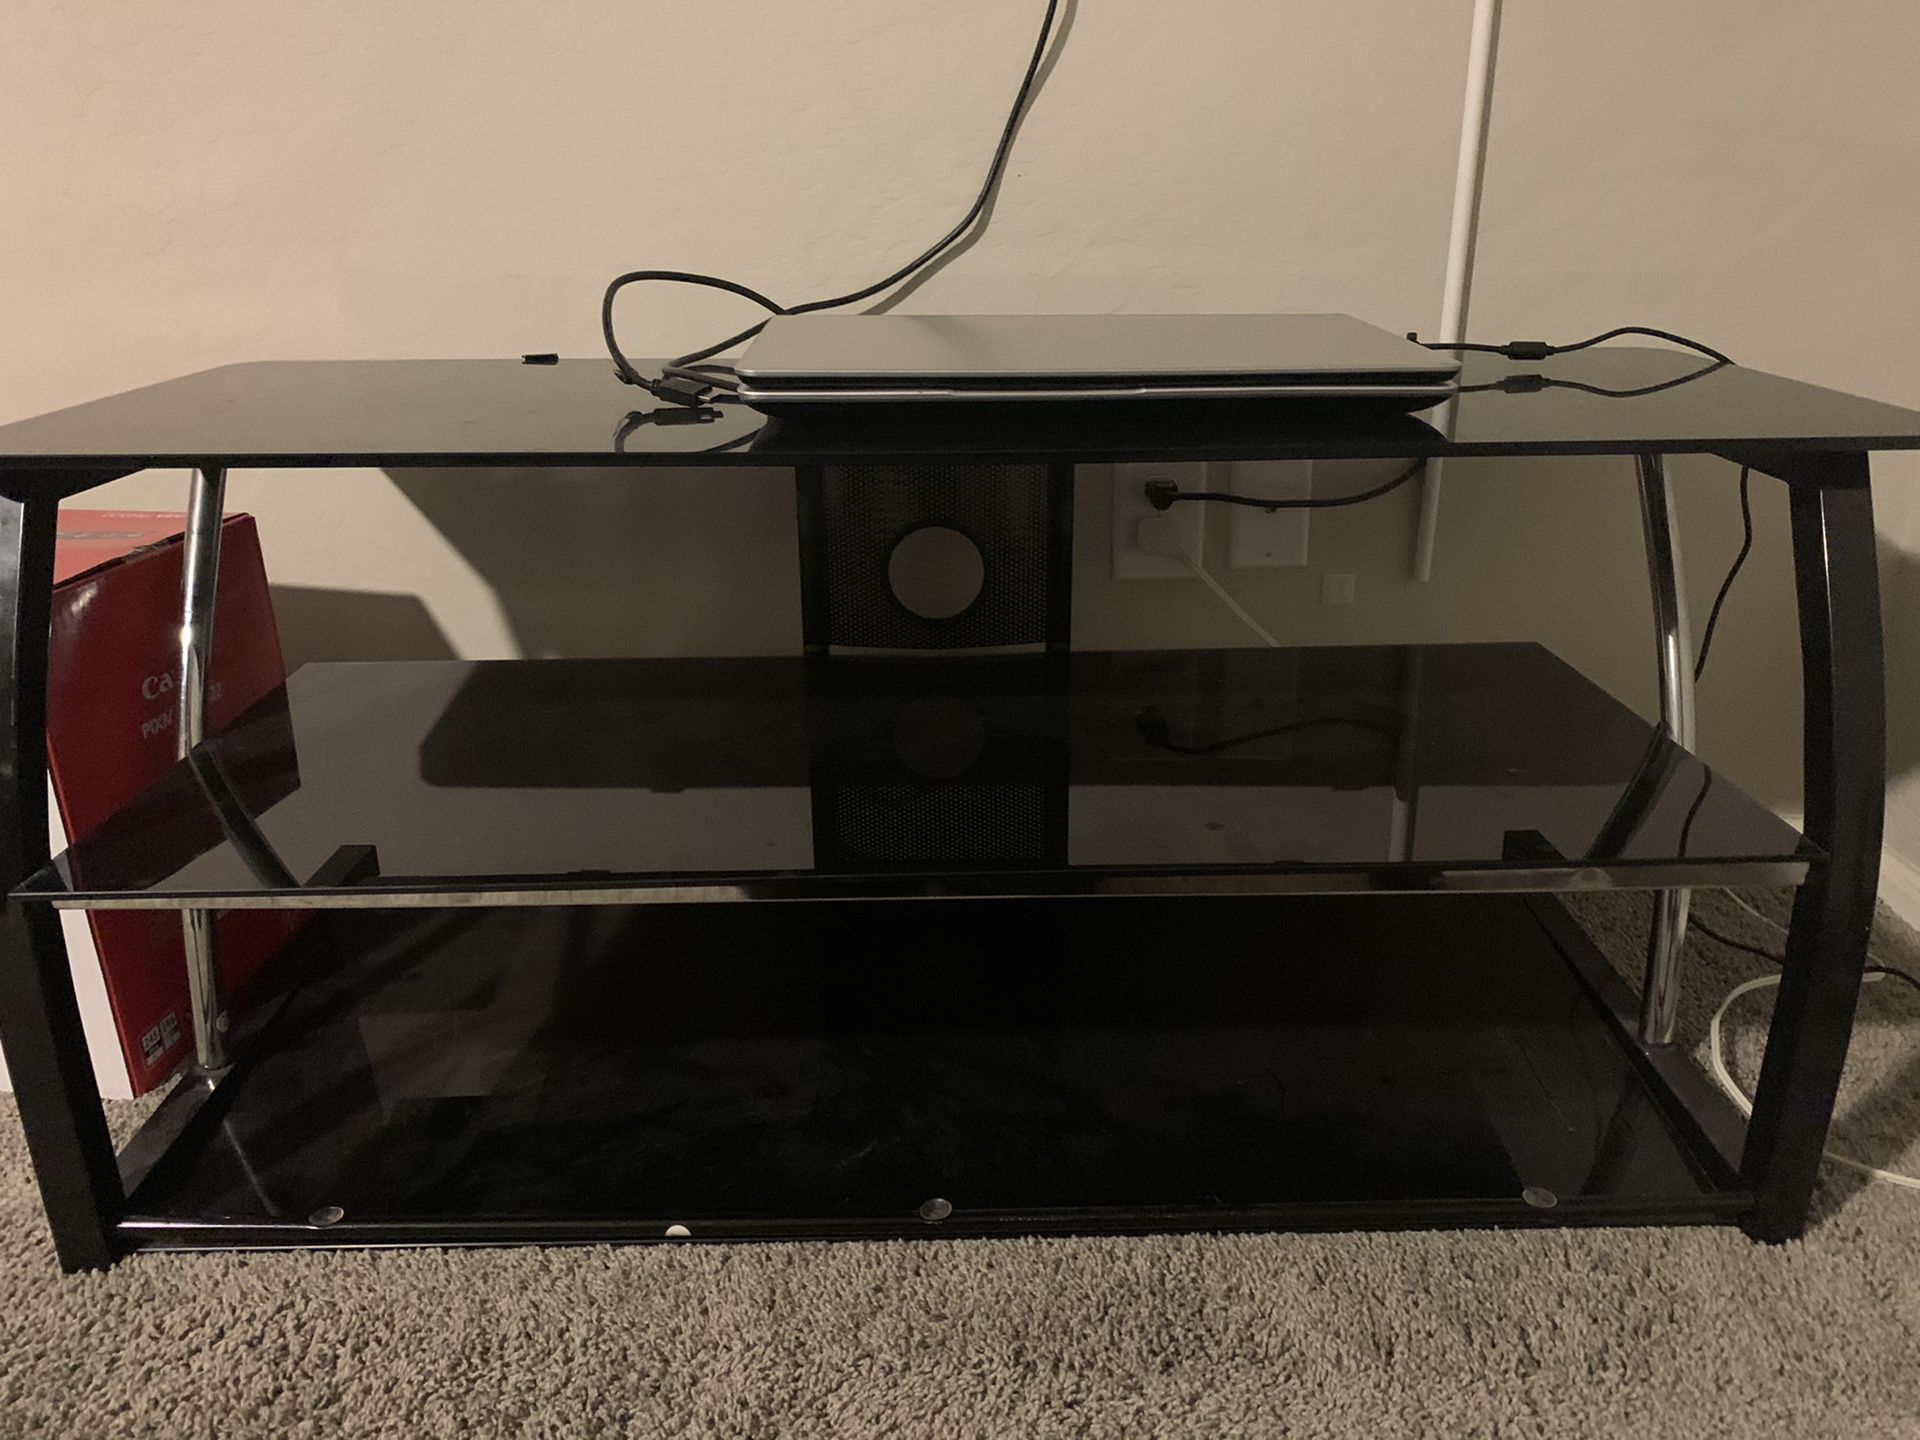 Entertainment Stand holds up to 50 inch TV